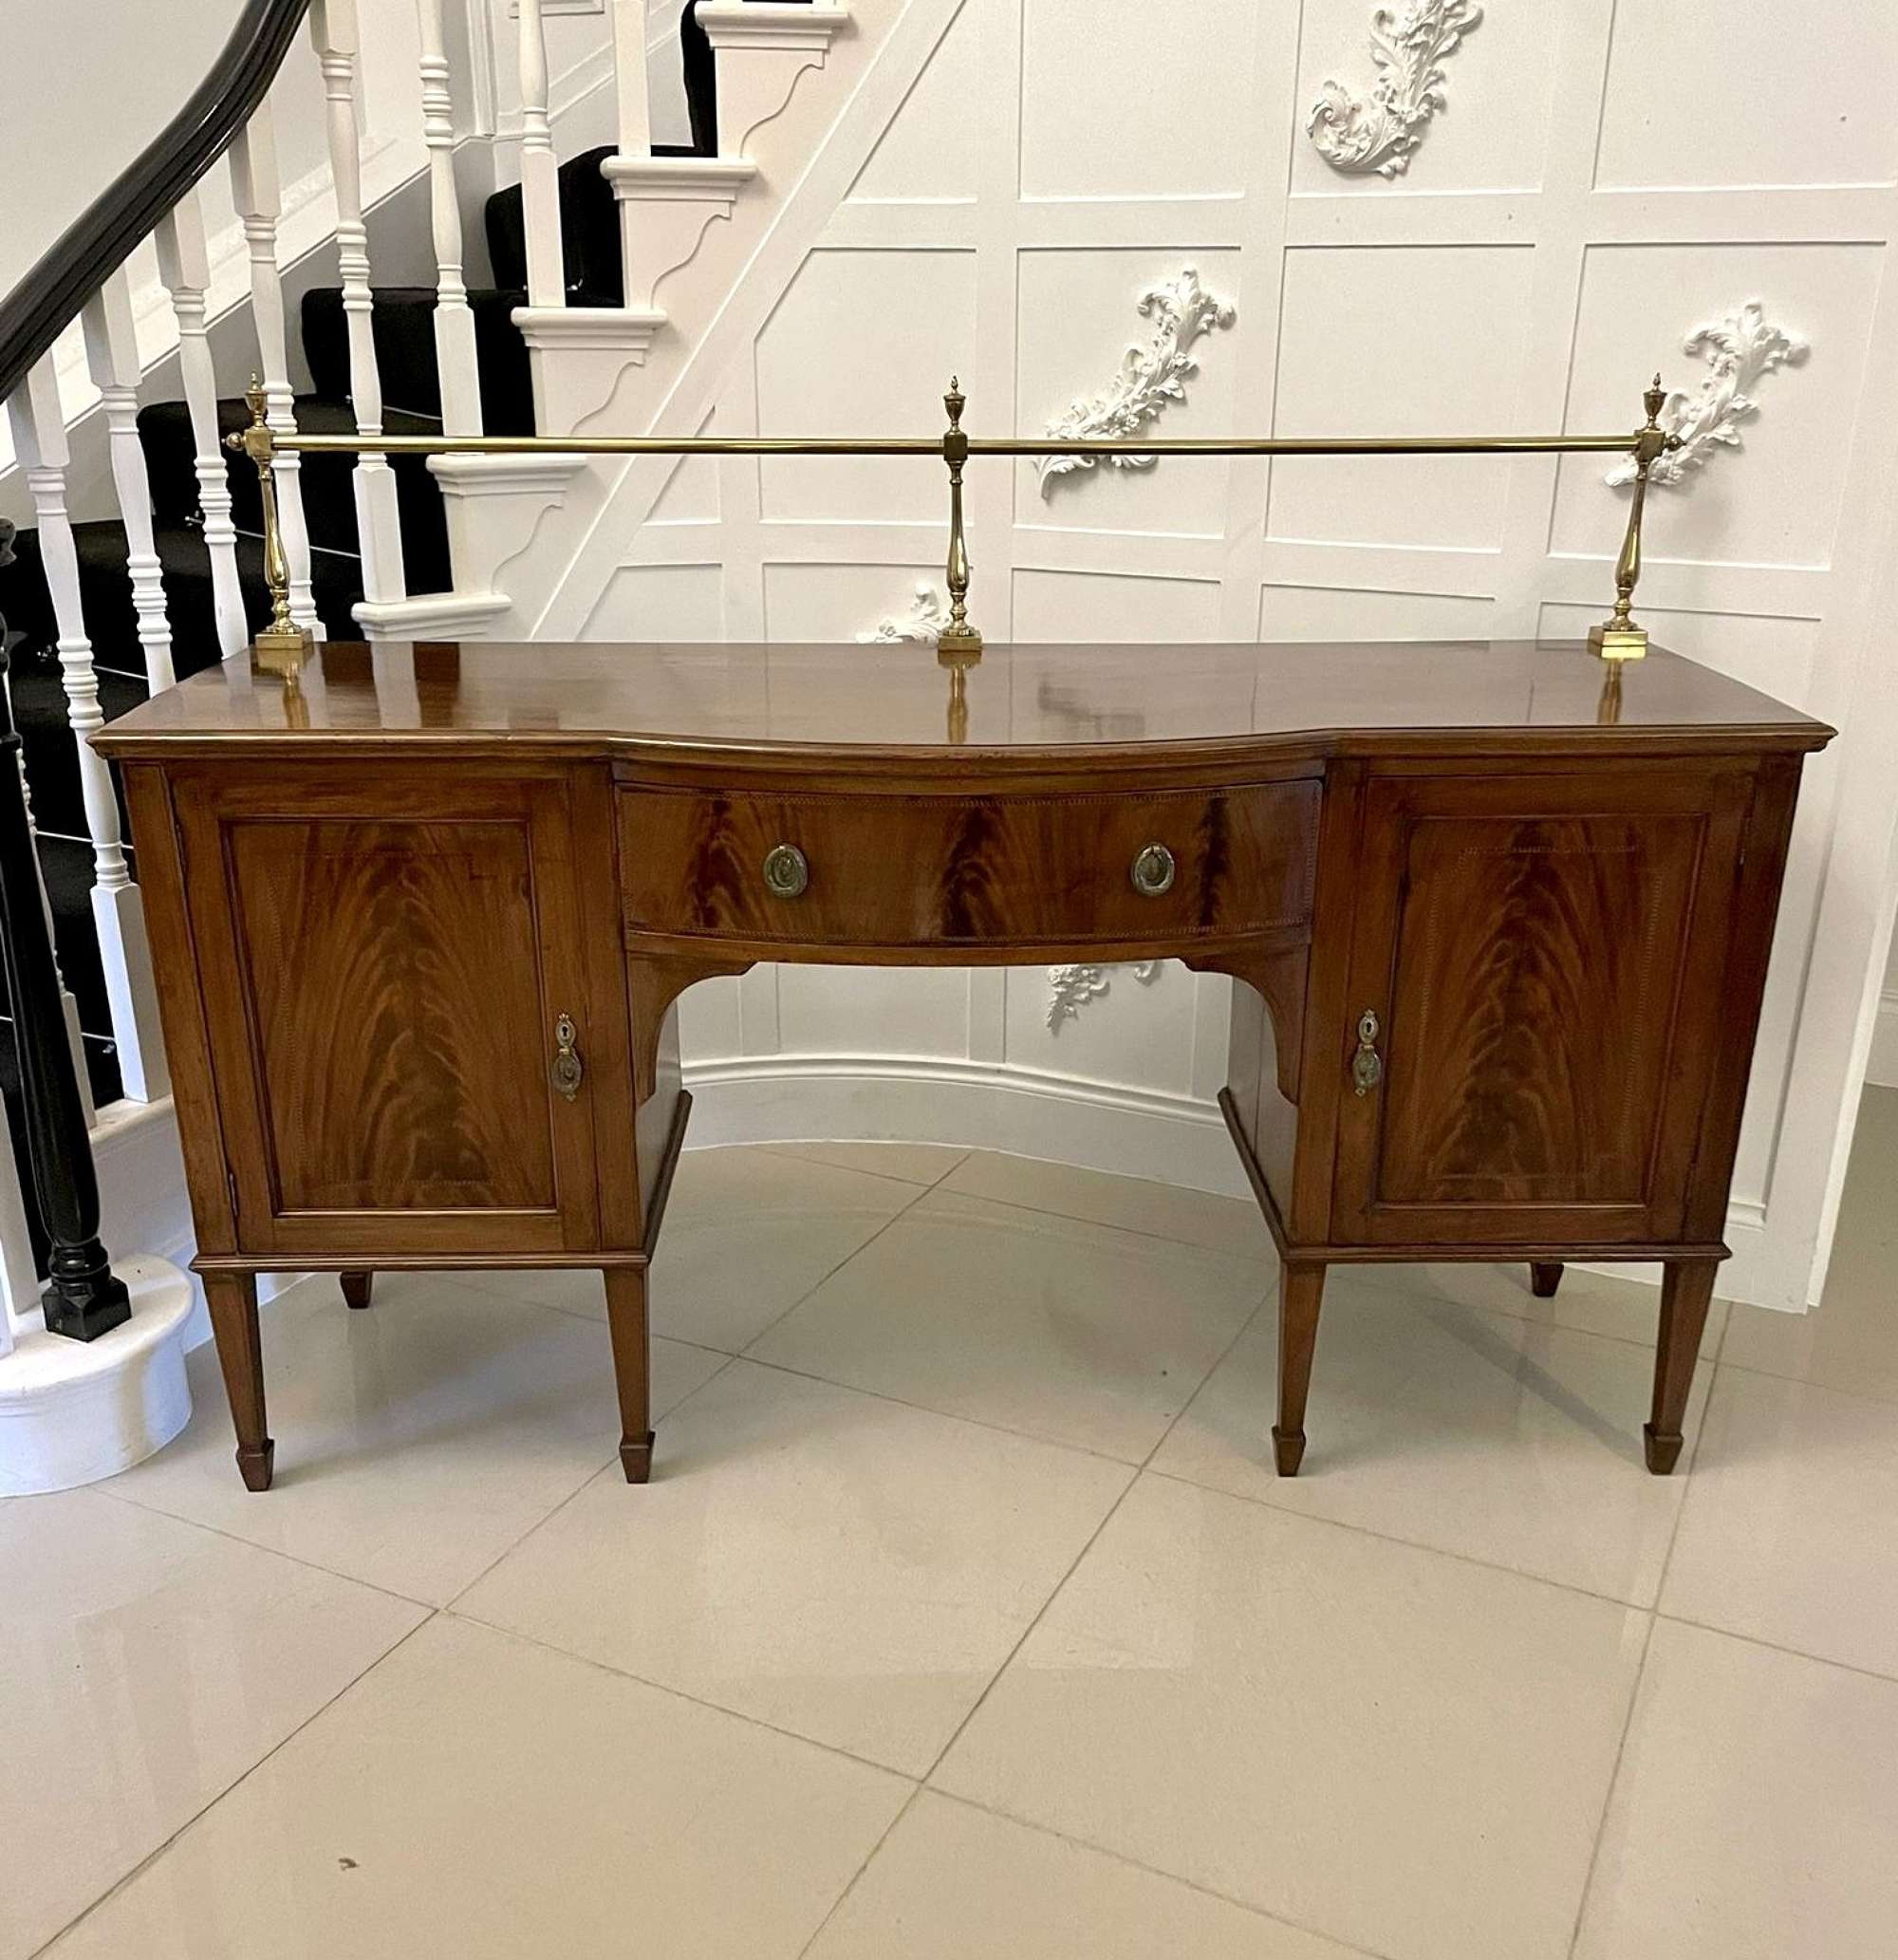 Antique Edwardian Mahogany Inlaid Sideboard By Hamptons and Sons, Pall Mall, London